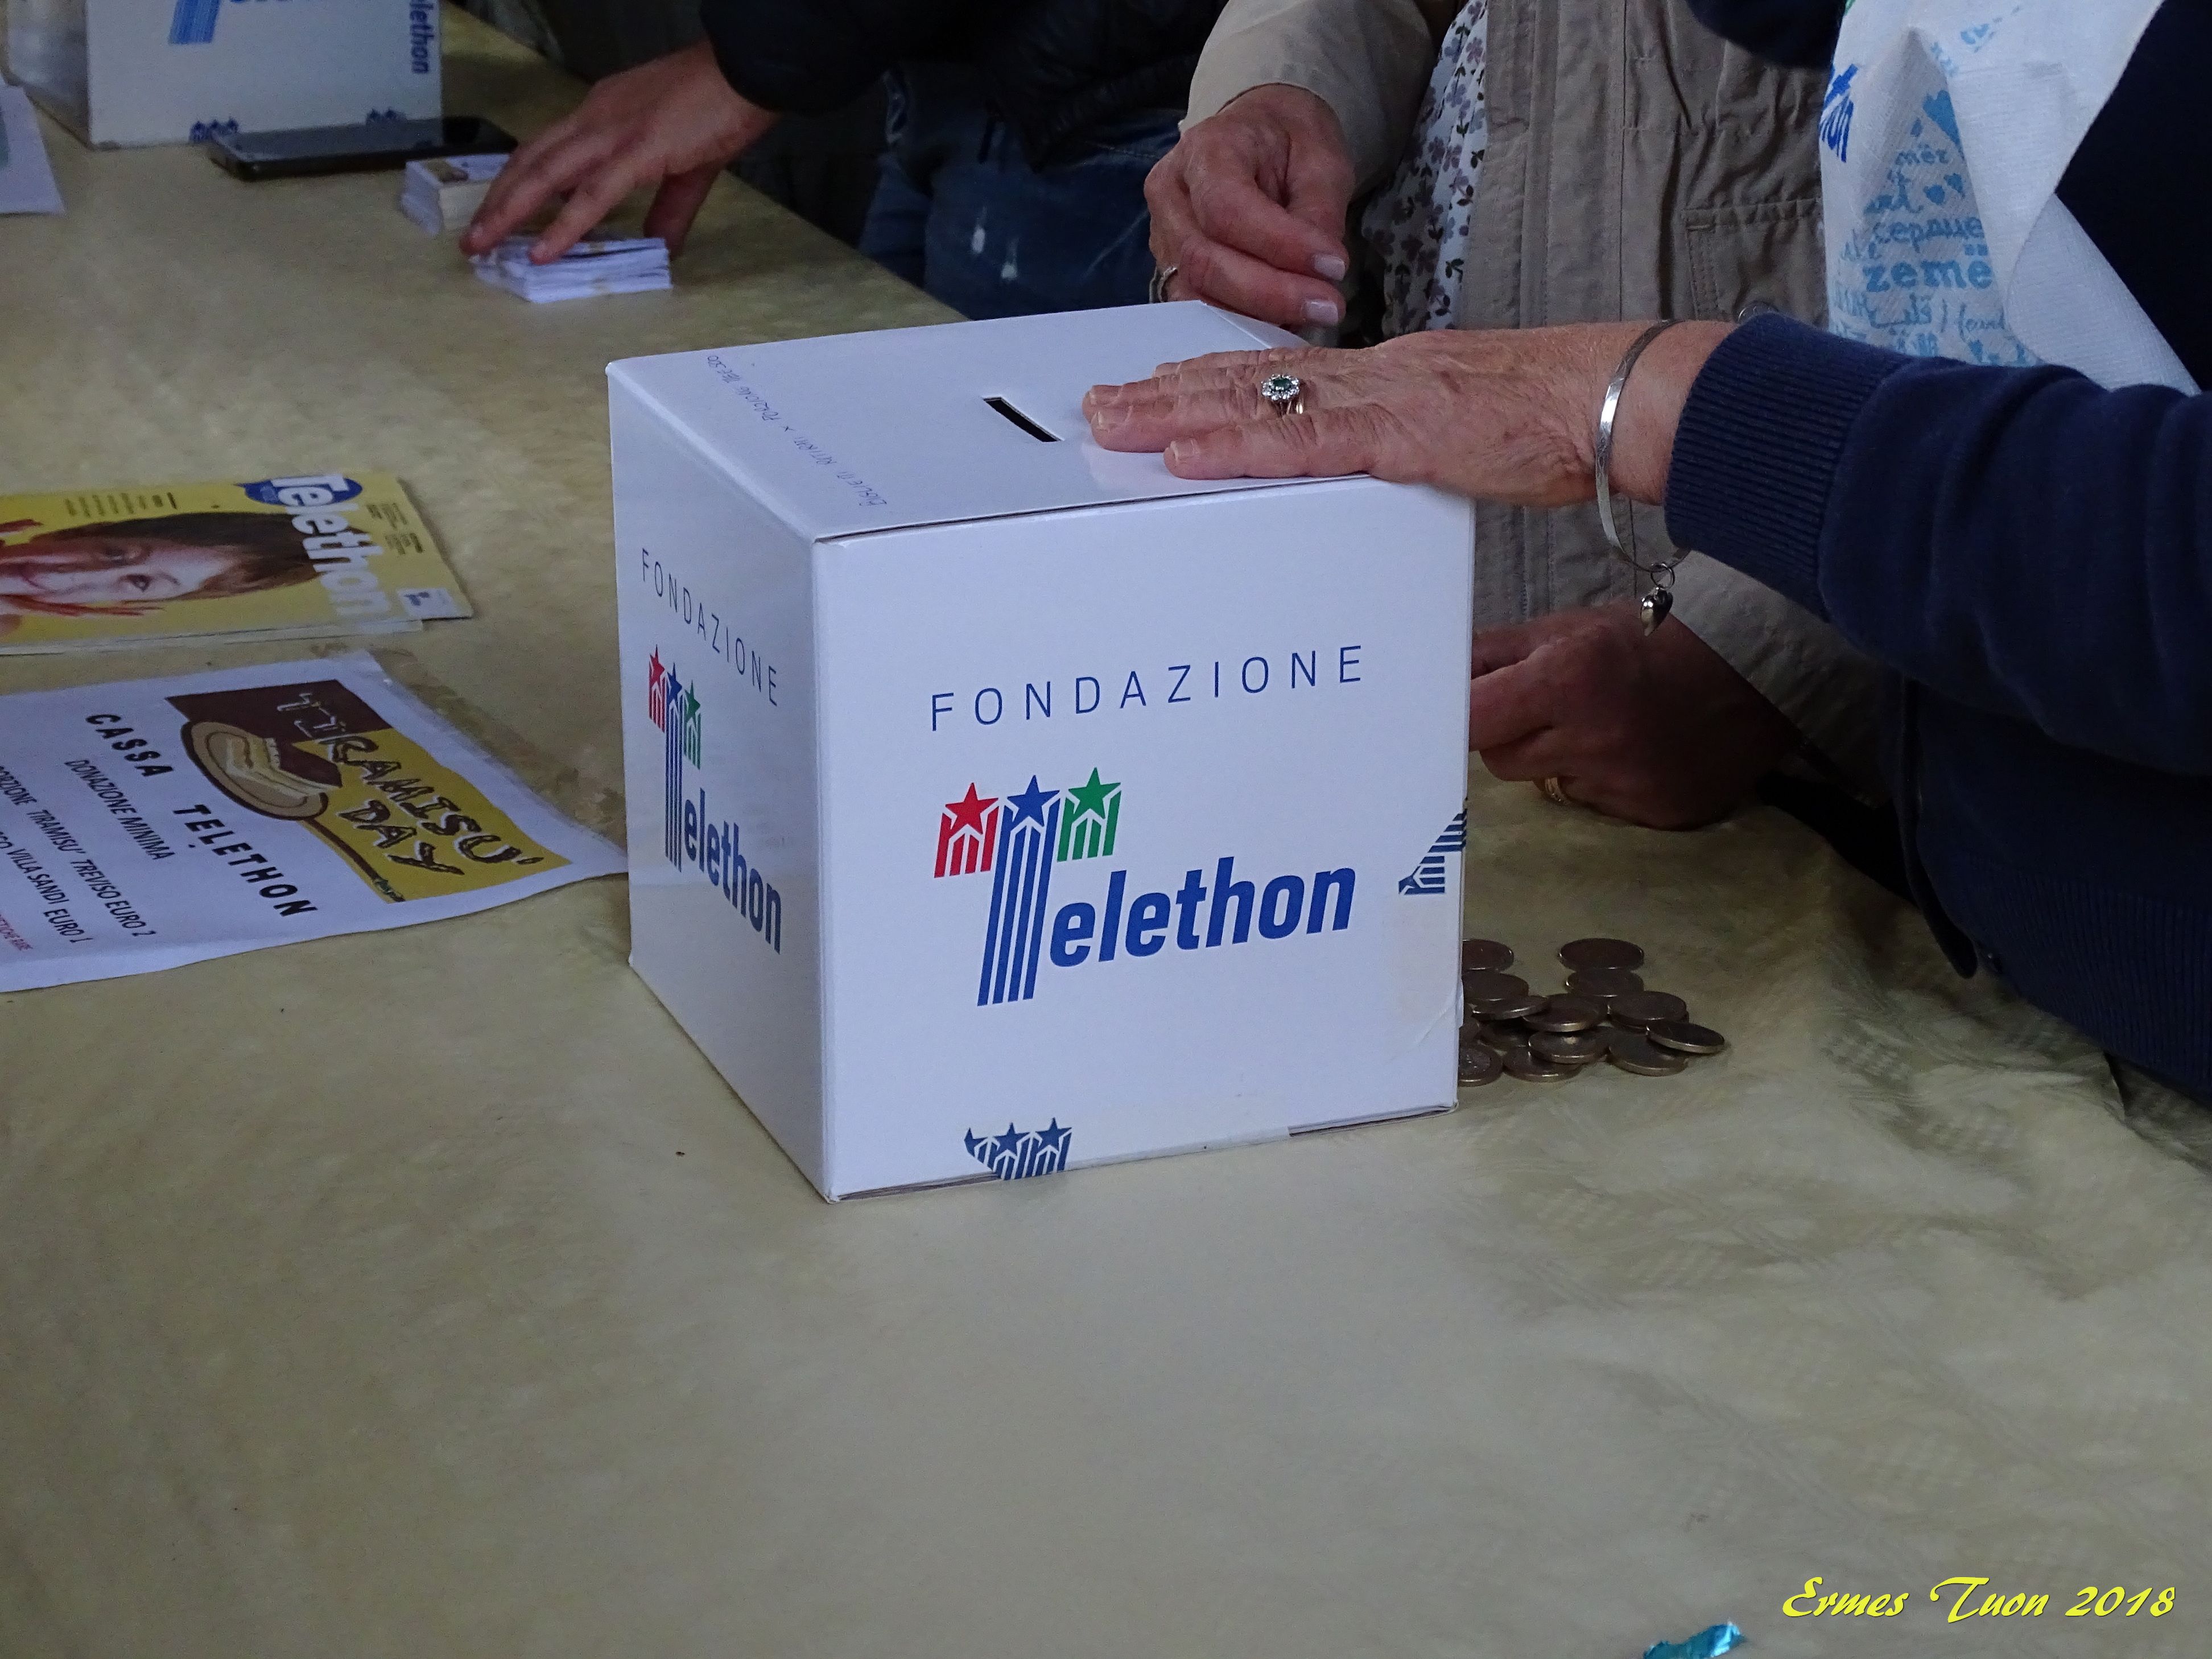 Caption: Telethon Association, supporting the event  to help scientific research